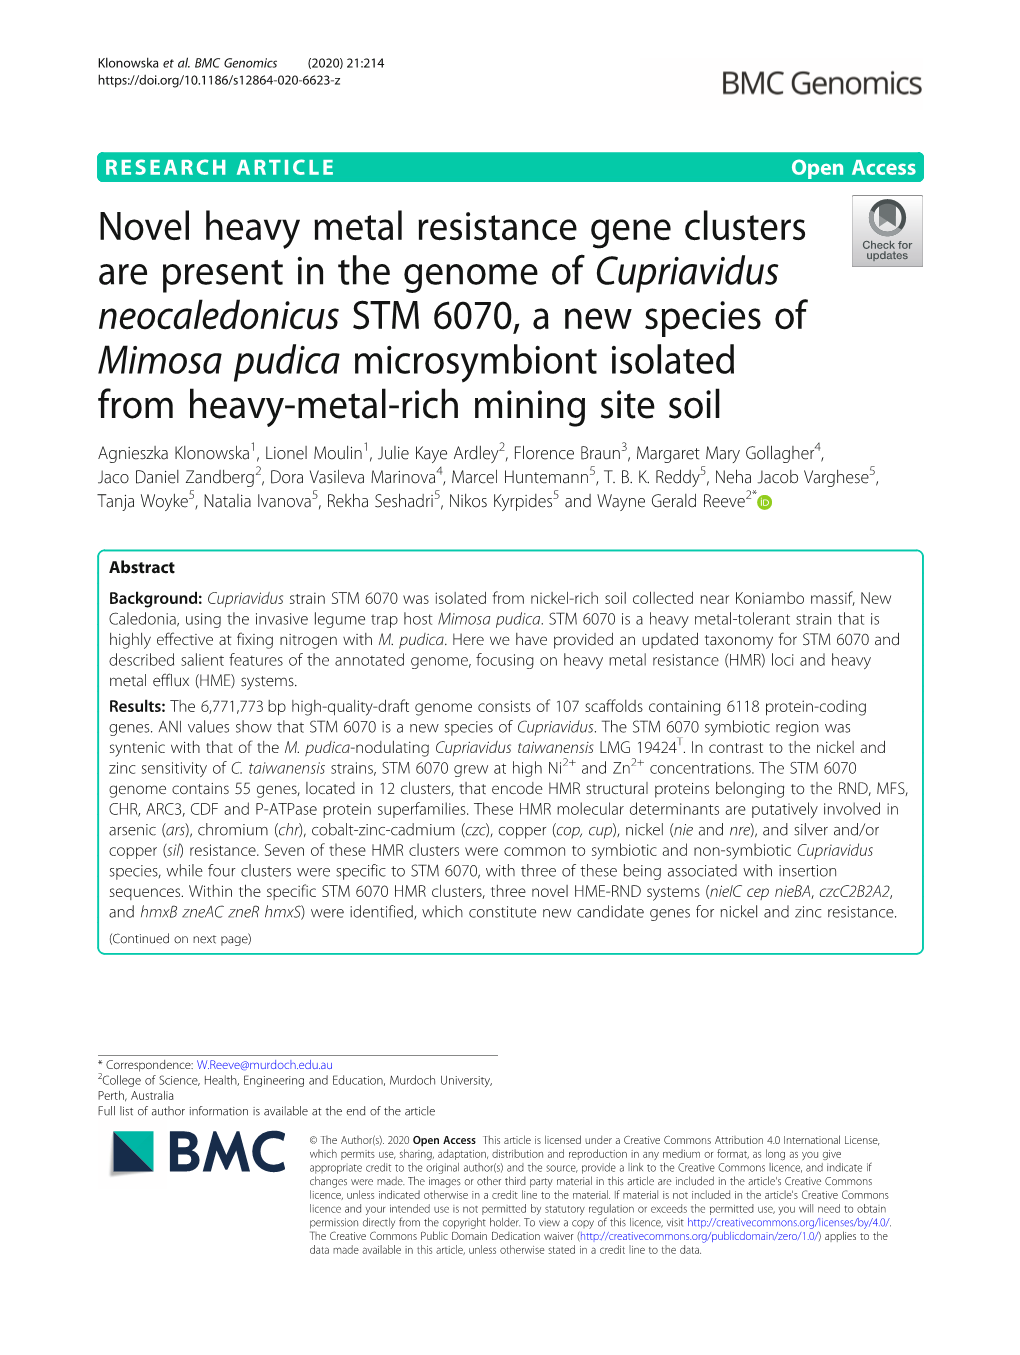 Novel Heavy Metal Resistance Gene Clusters Are Present in the Genome